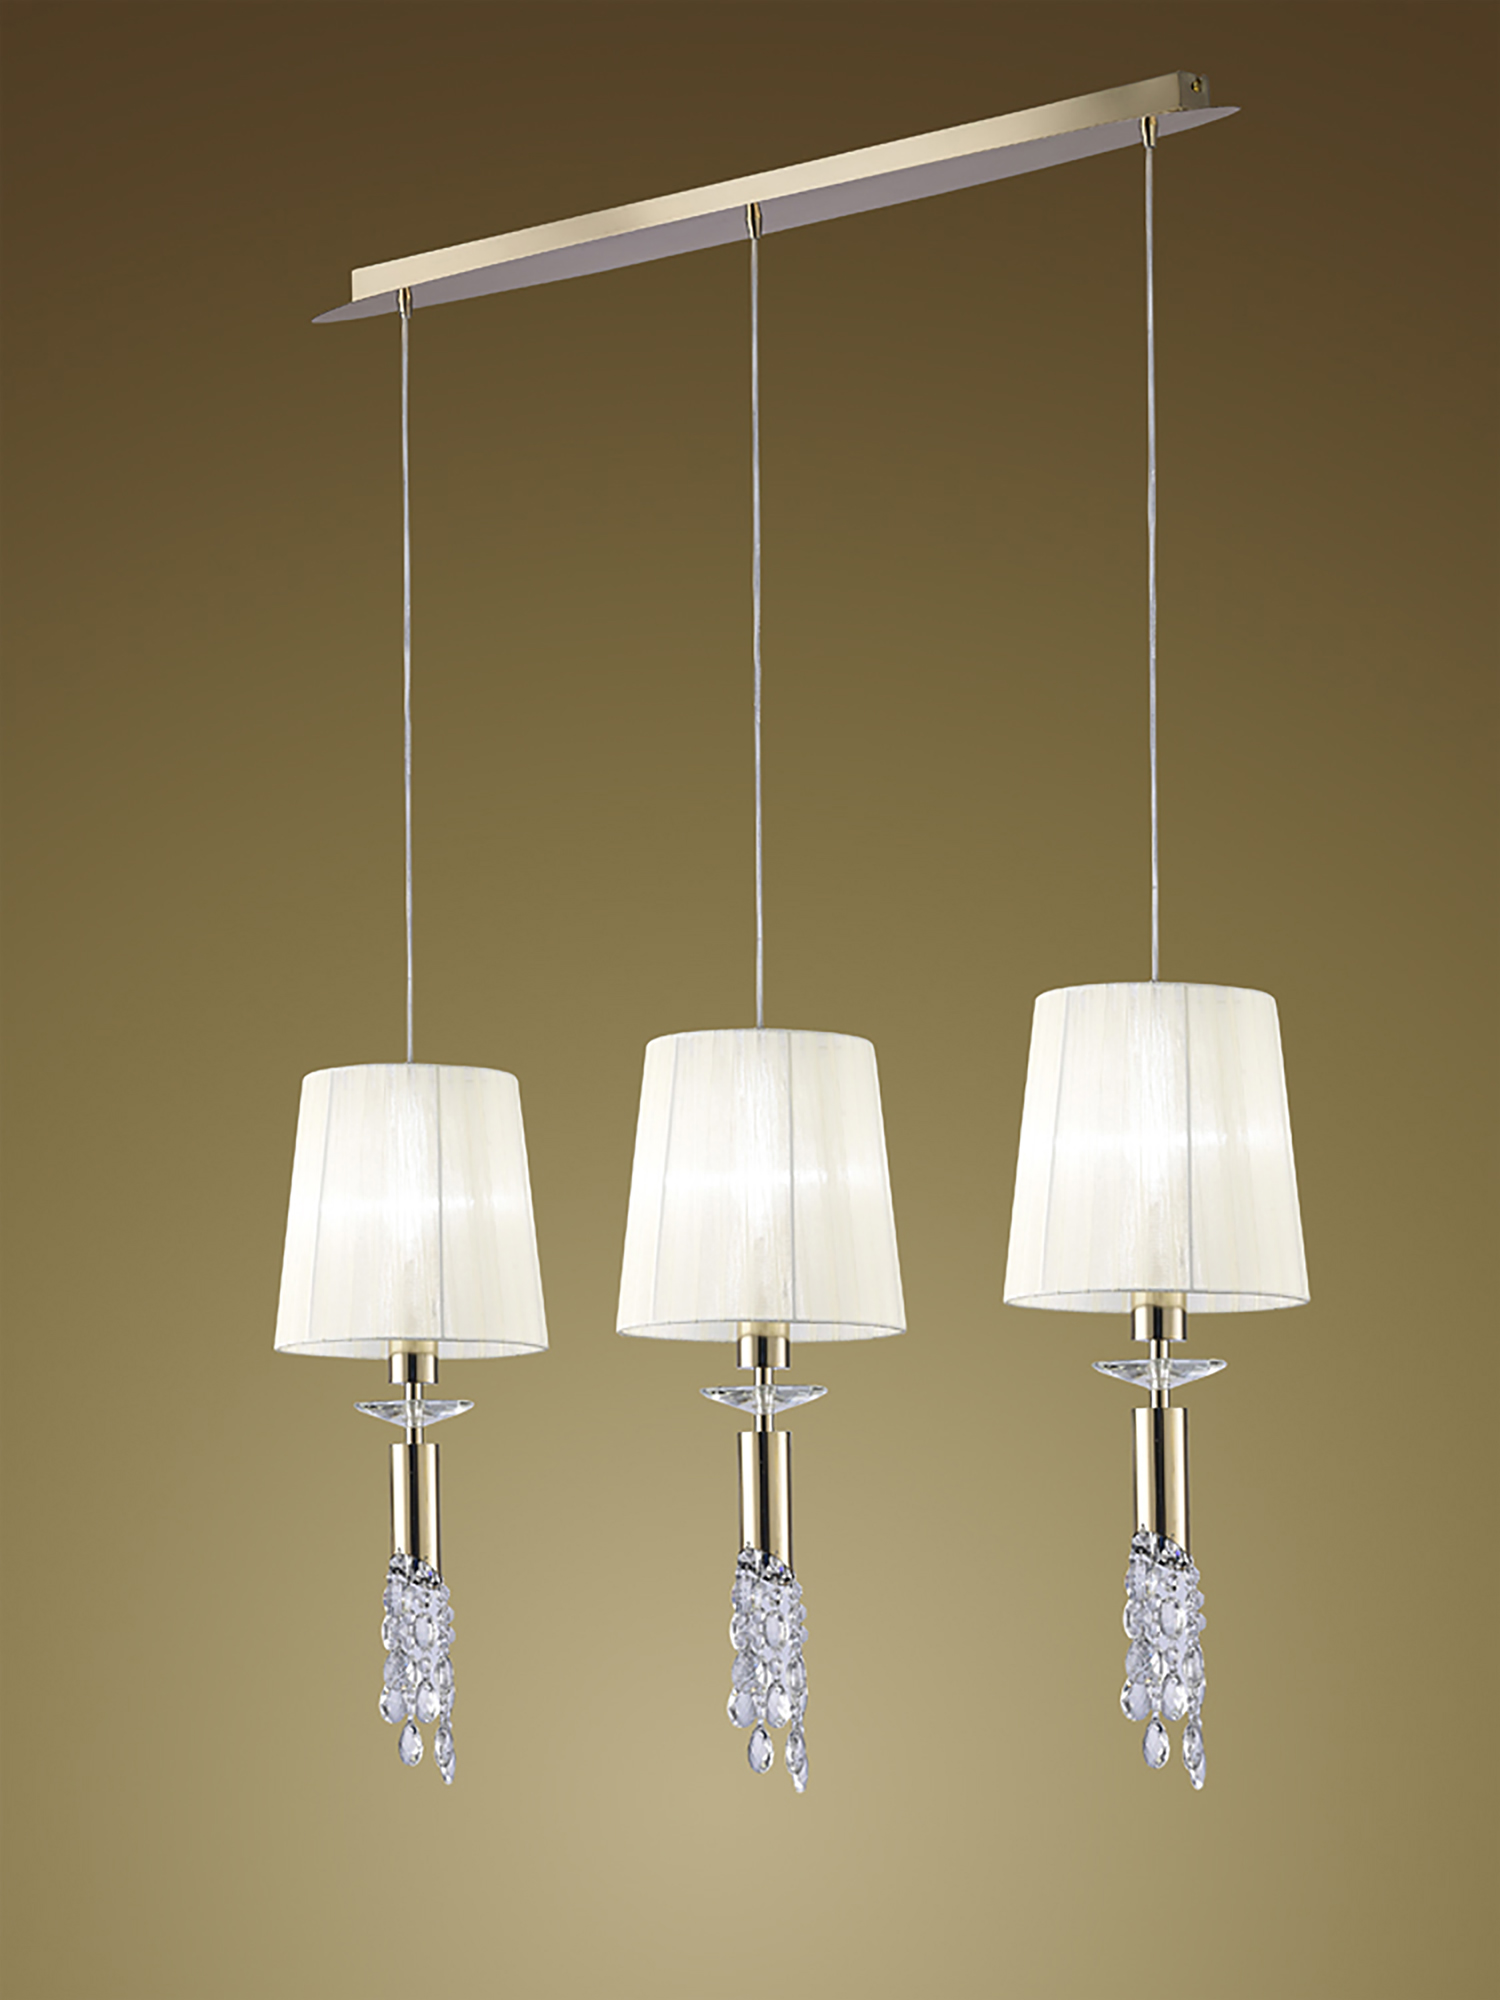 Tiffany French Gold-White Crystal Ceiling Lights Mantra Linear Crystal Fittings